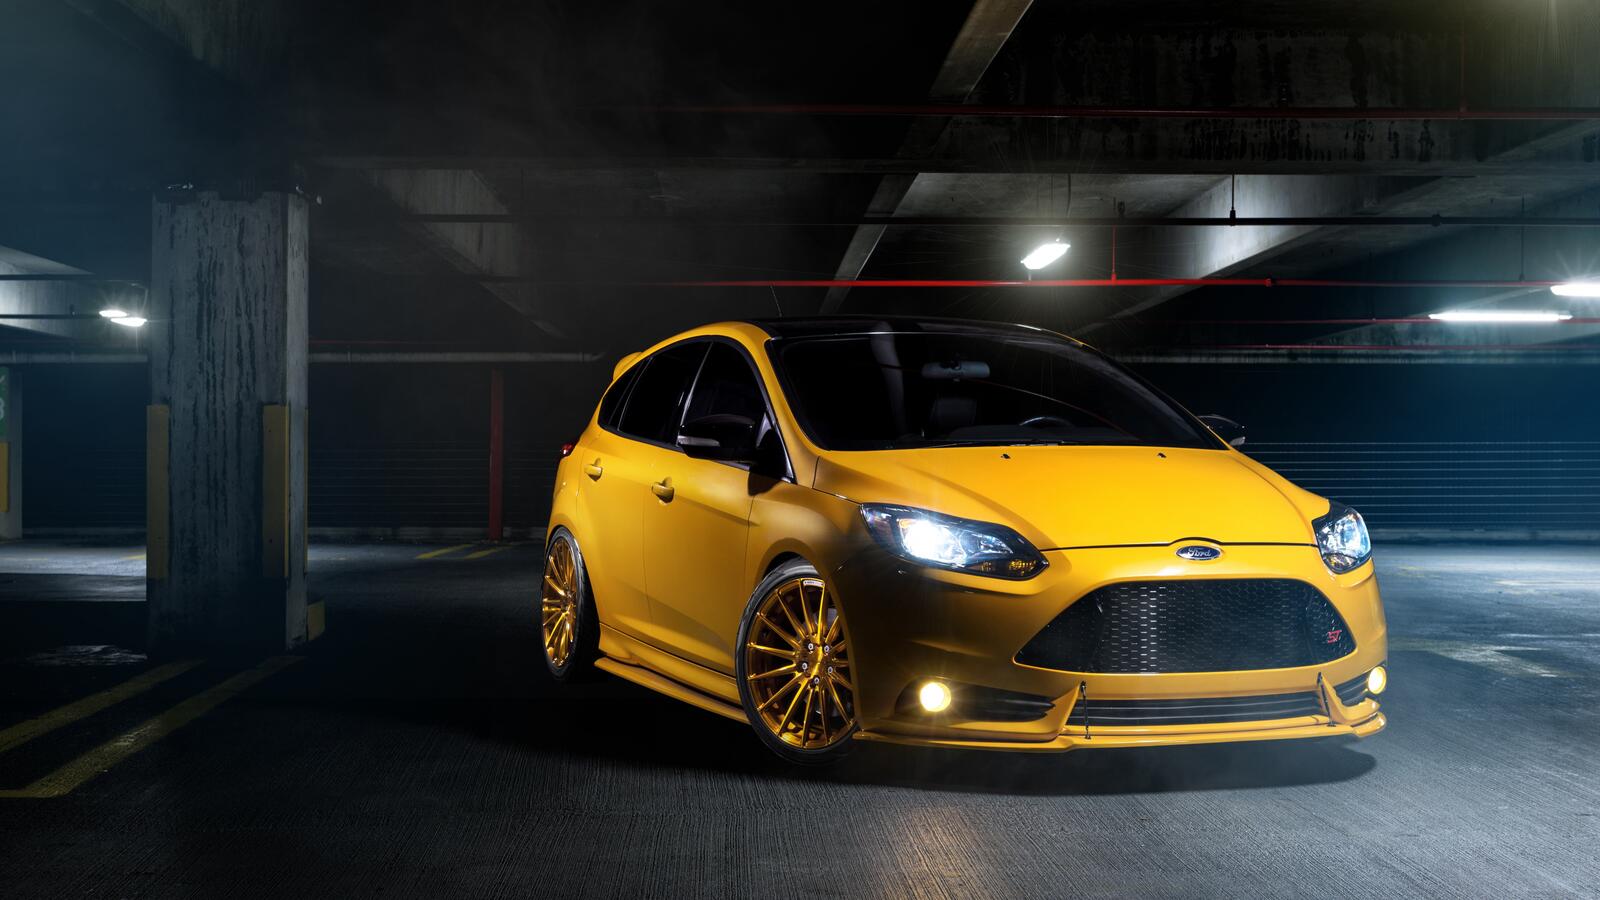 Wallpapers focus Ford cars on the desktop